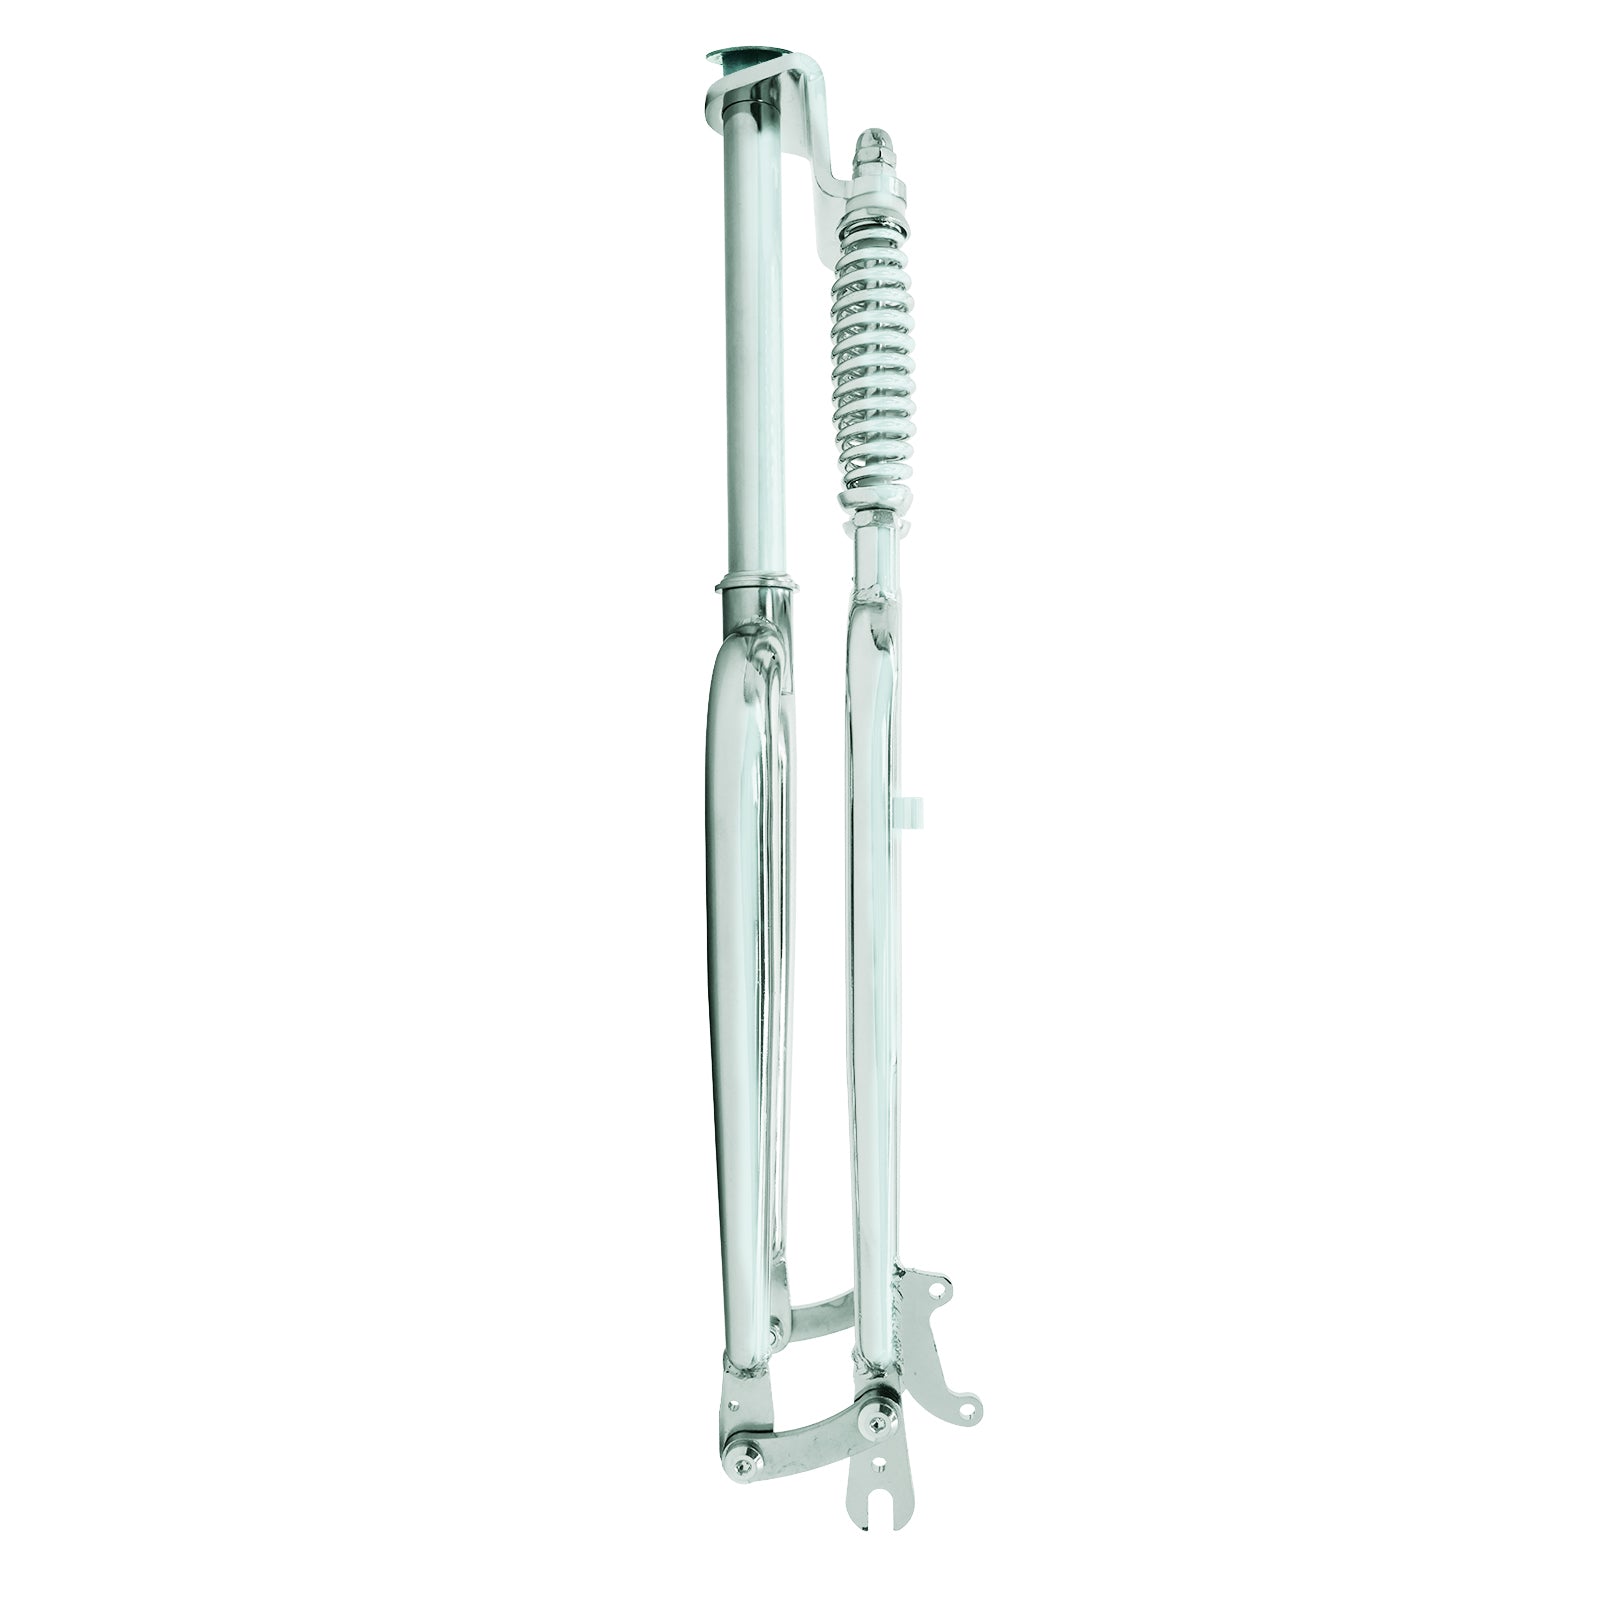 Tracer FK-DS26218100D 26'' Dual Classical Springer Fork 25.4(1")x218mm with Disc Brake.